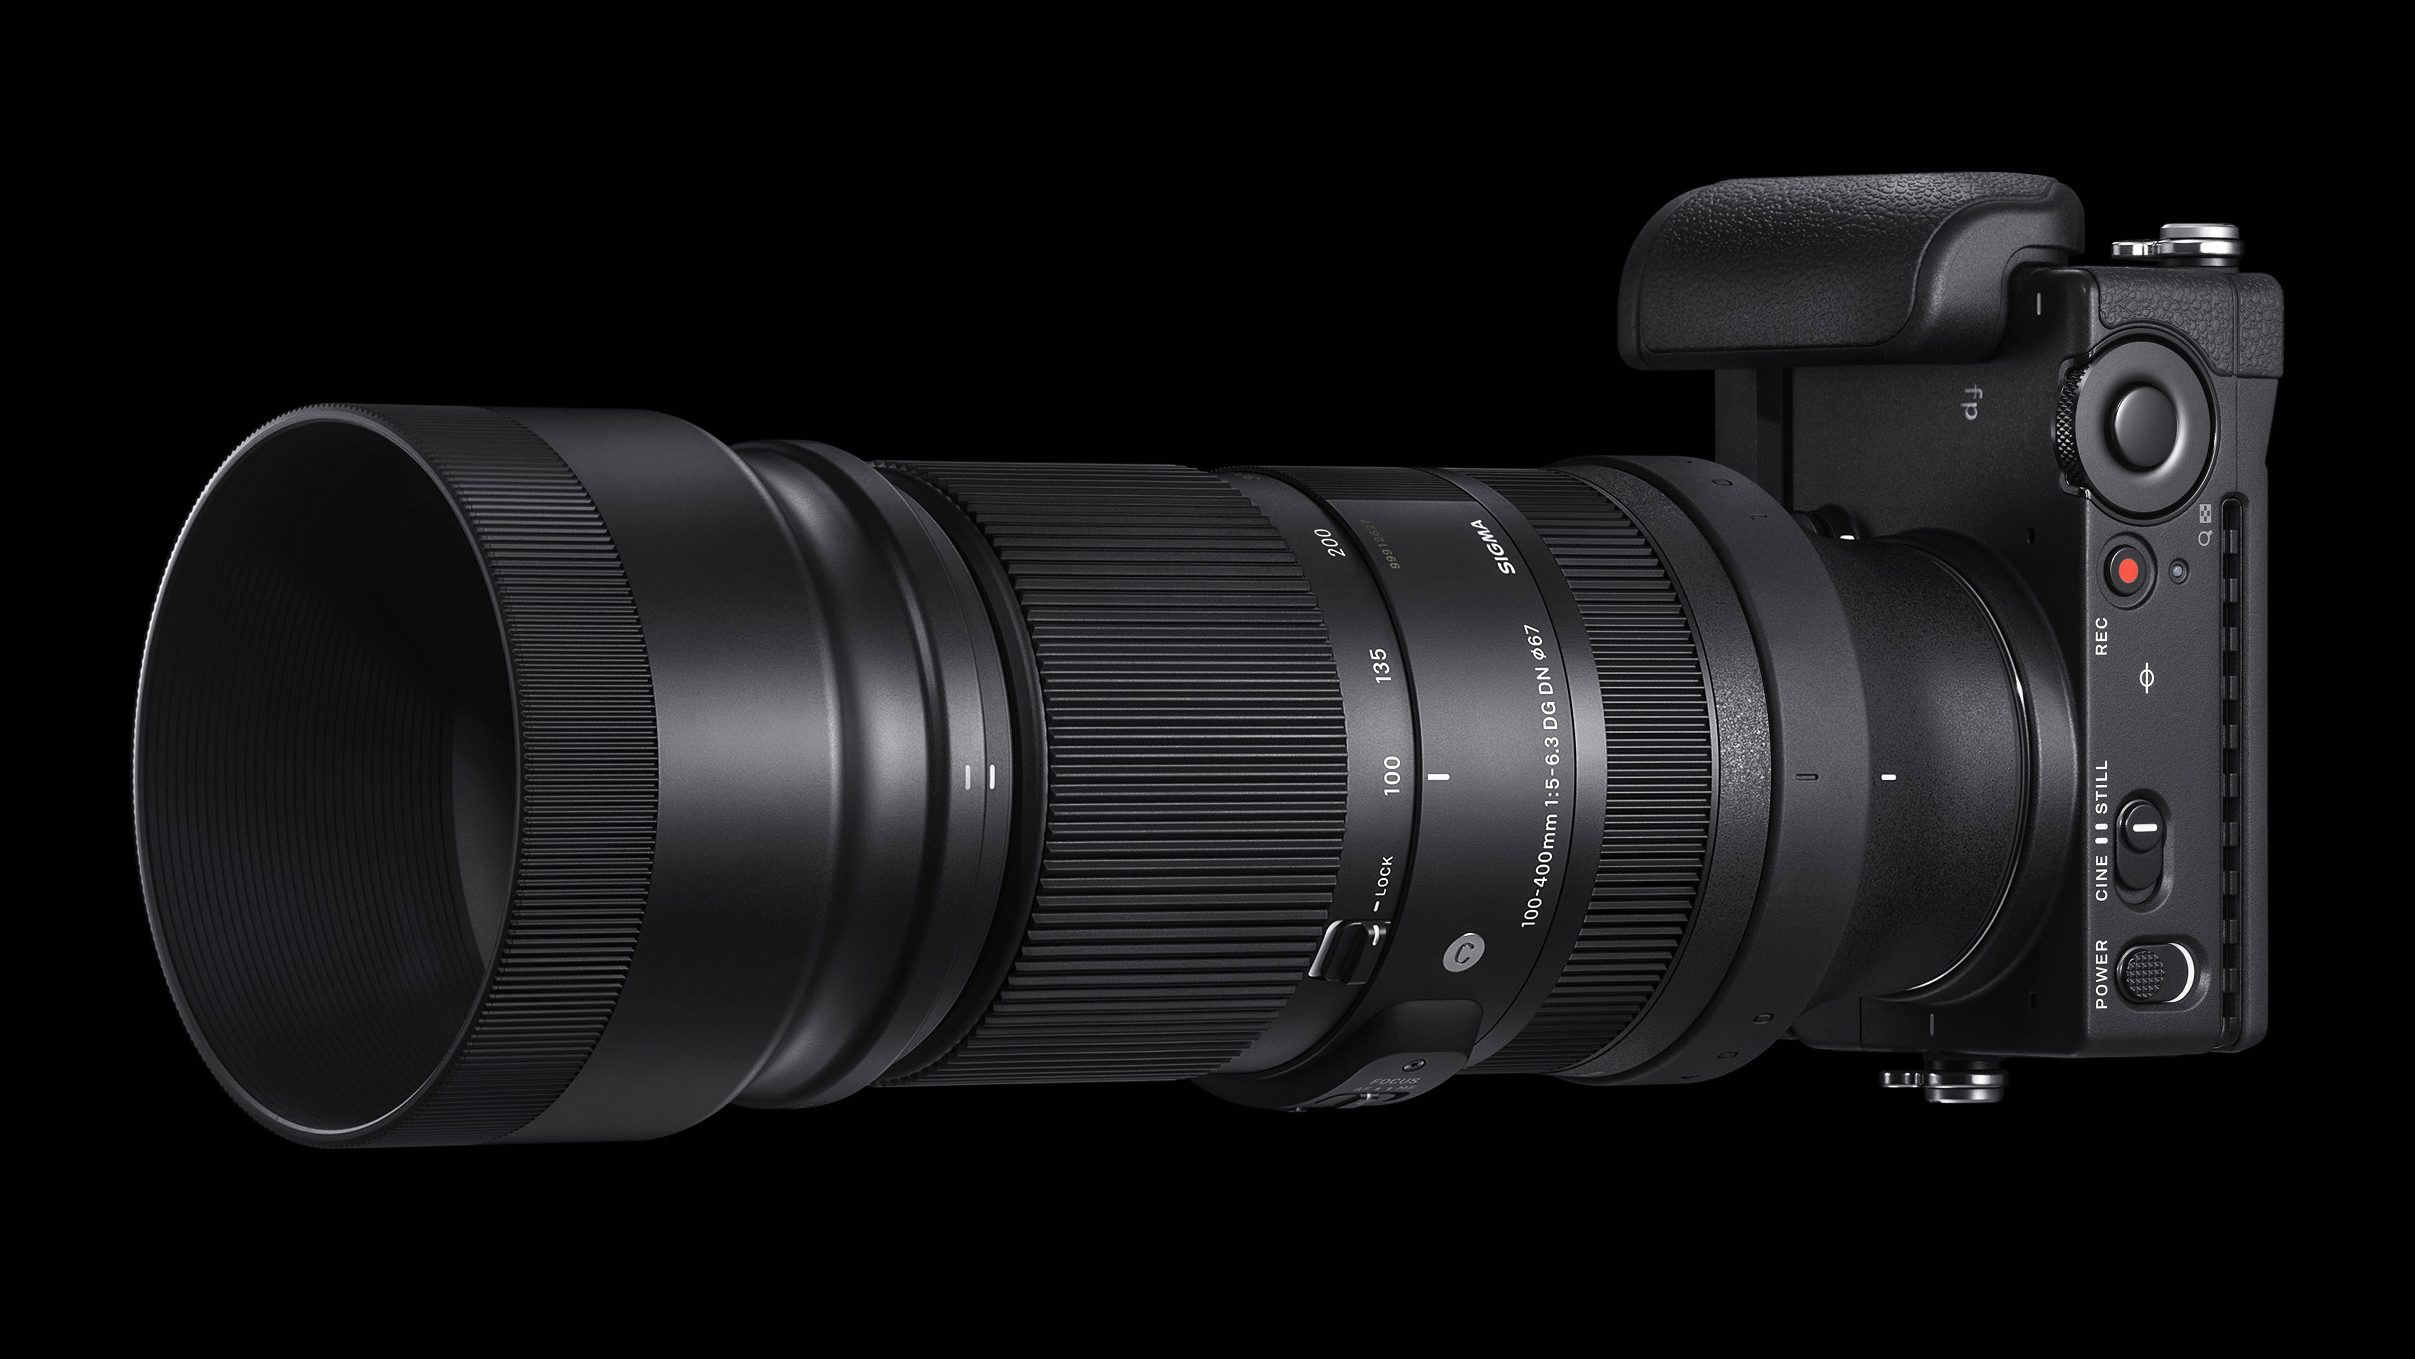 Sigma 100-400mm f/5-6.3 DG DN OS coming to Sony E and L-mount in